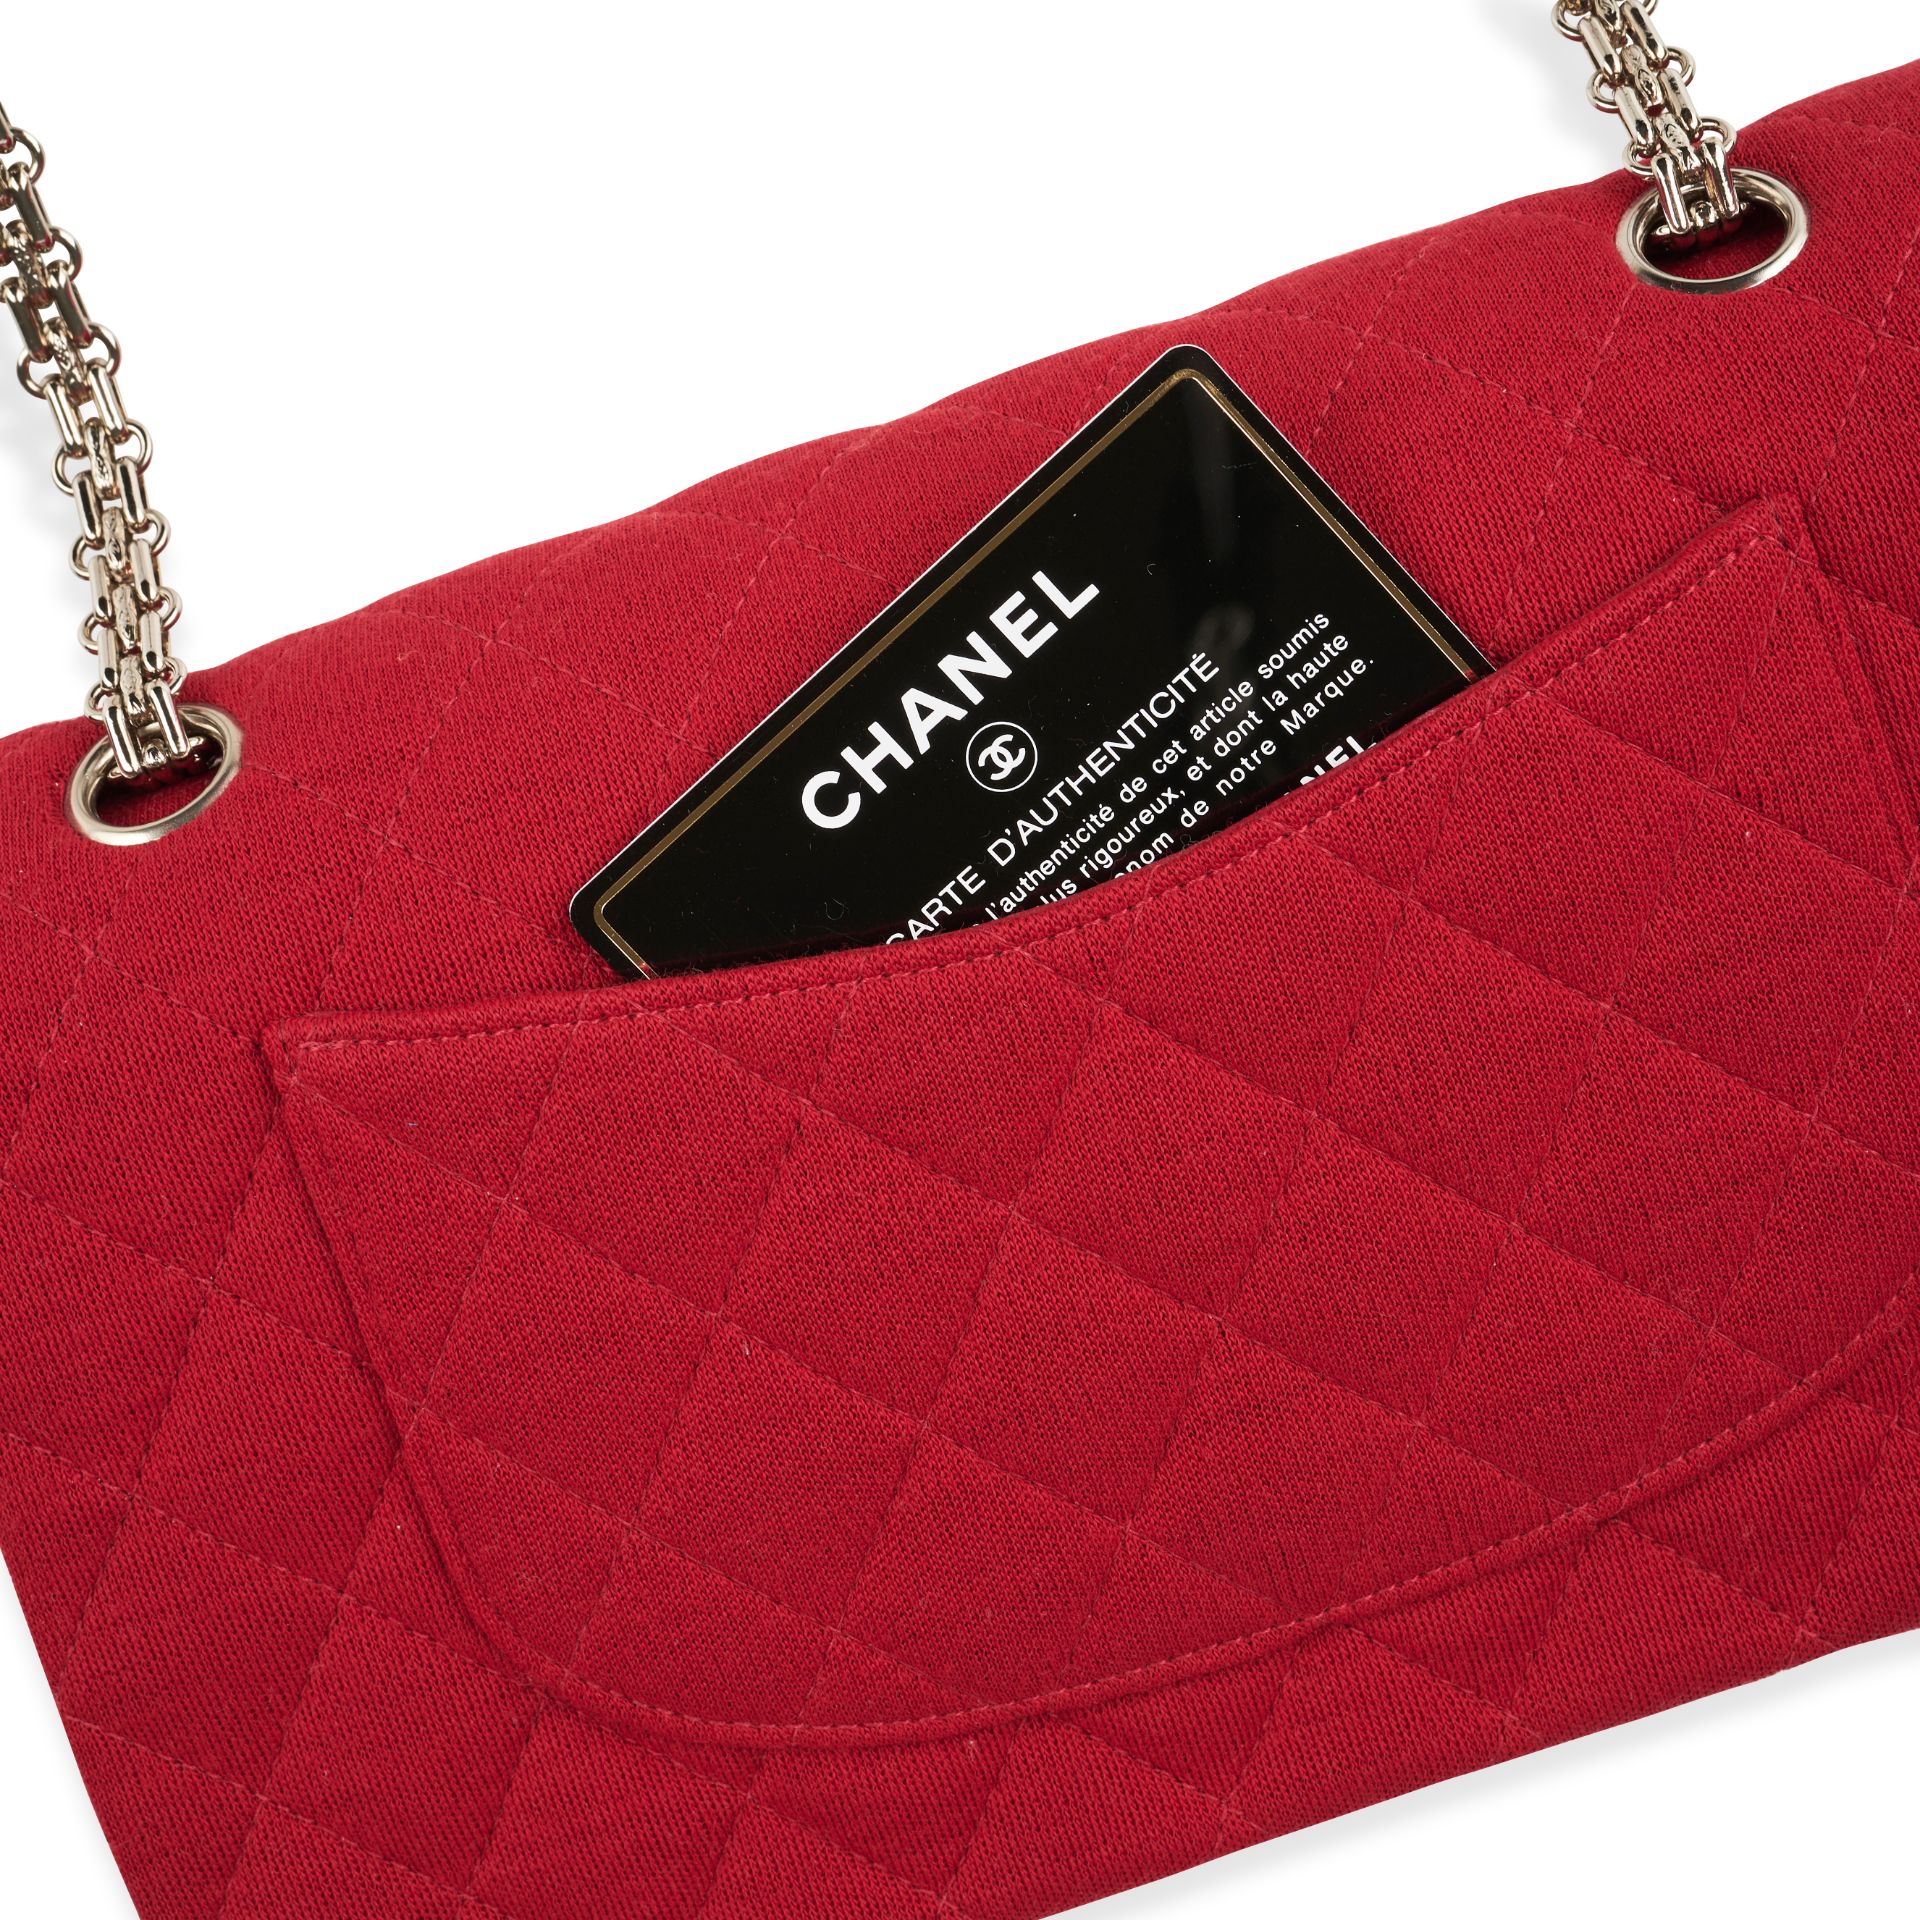 CHANEL RED FABRIC MEDIUM CLASSIC FLAP BAG Condition grade A-. Produced in 2005. 25cm long, 16cm... - Image 5 of 6